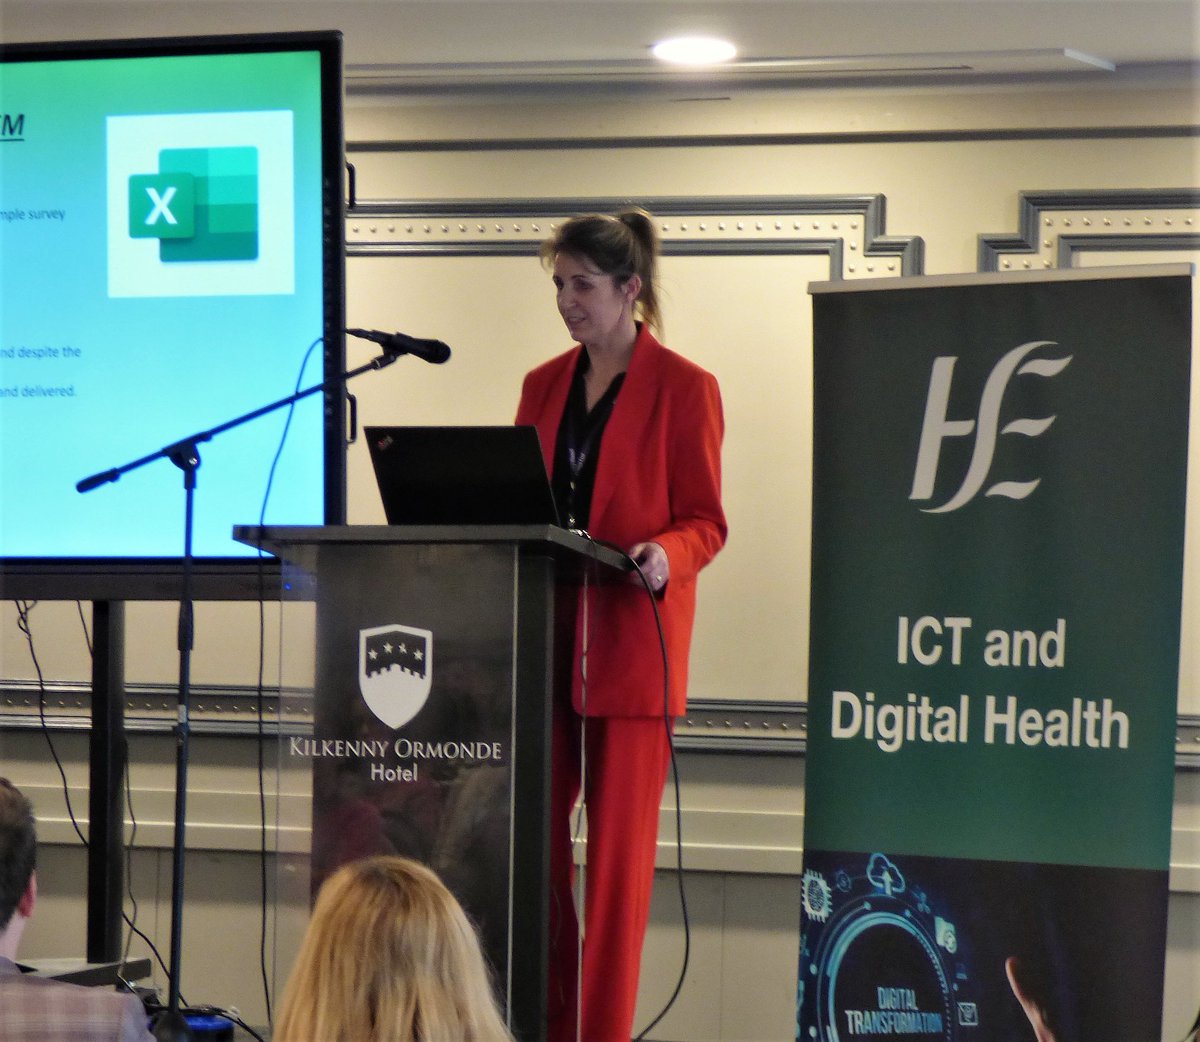 Thank and Congratulations to @HSEICTSouthEast and so many @HSELive colleagues across varied services for participating in and contributing to the comprehensive learning opportunity that was the “Digital Health Redefining the South East” event in @kilkennyormonde this afternoon